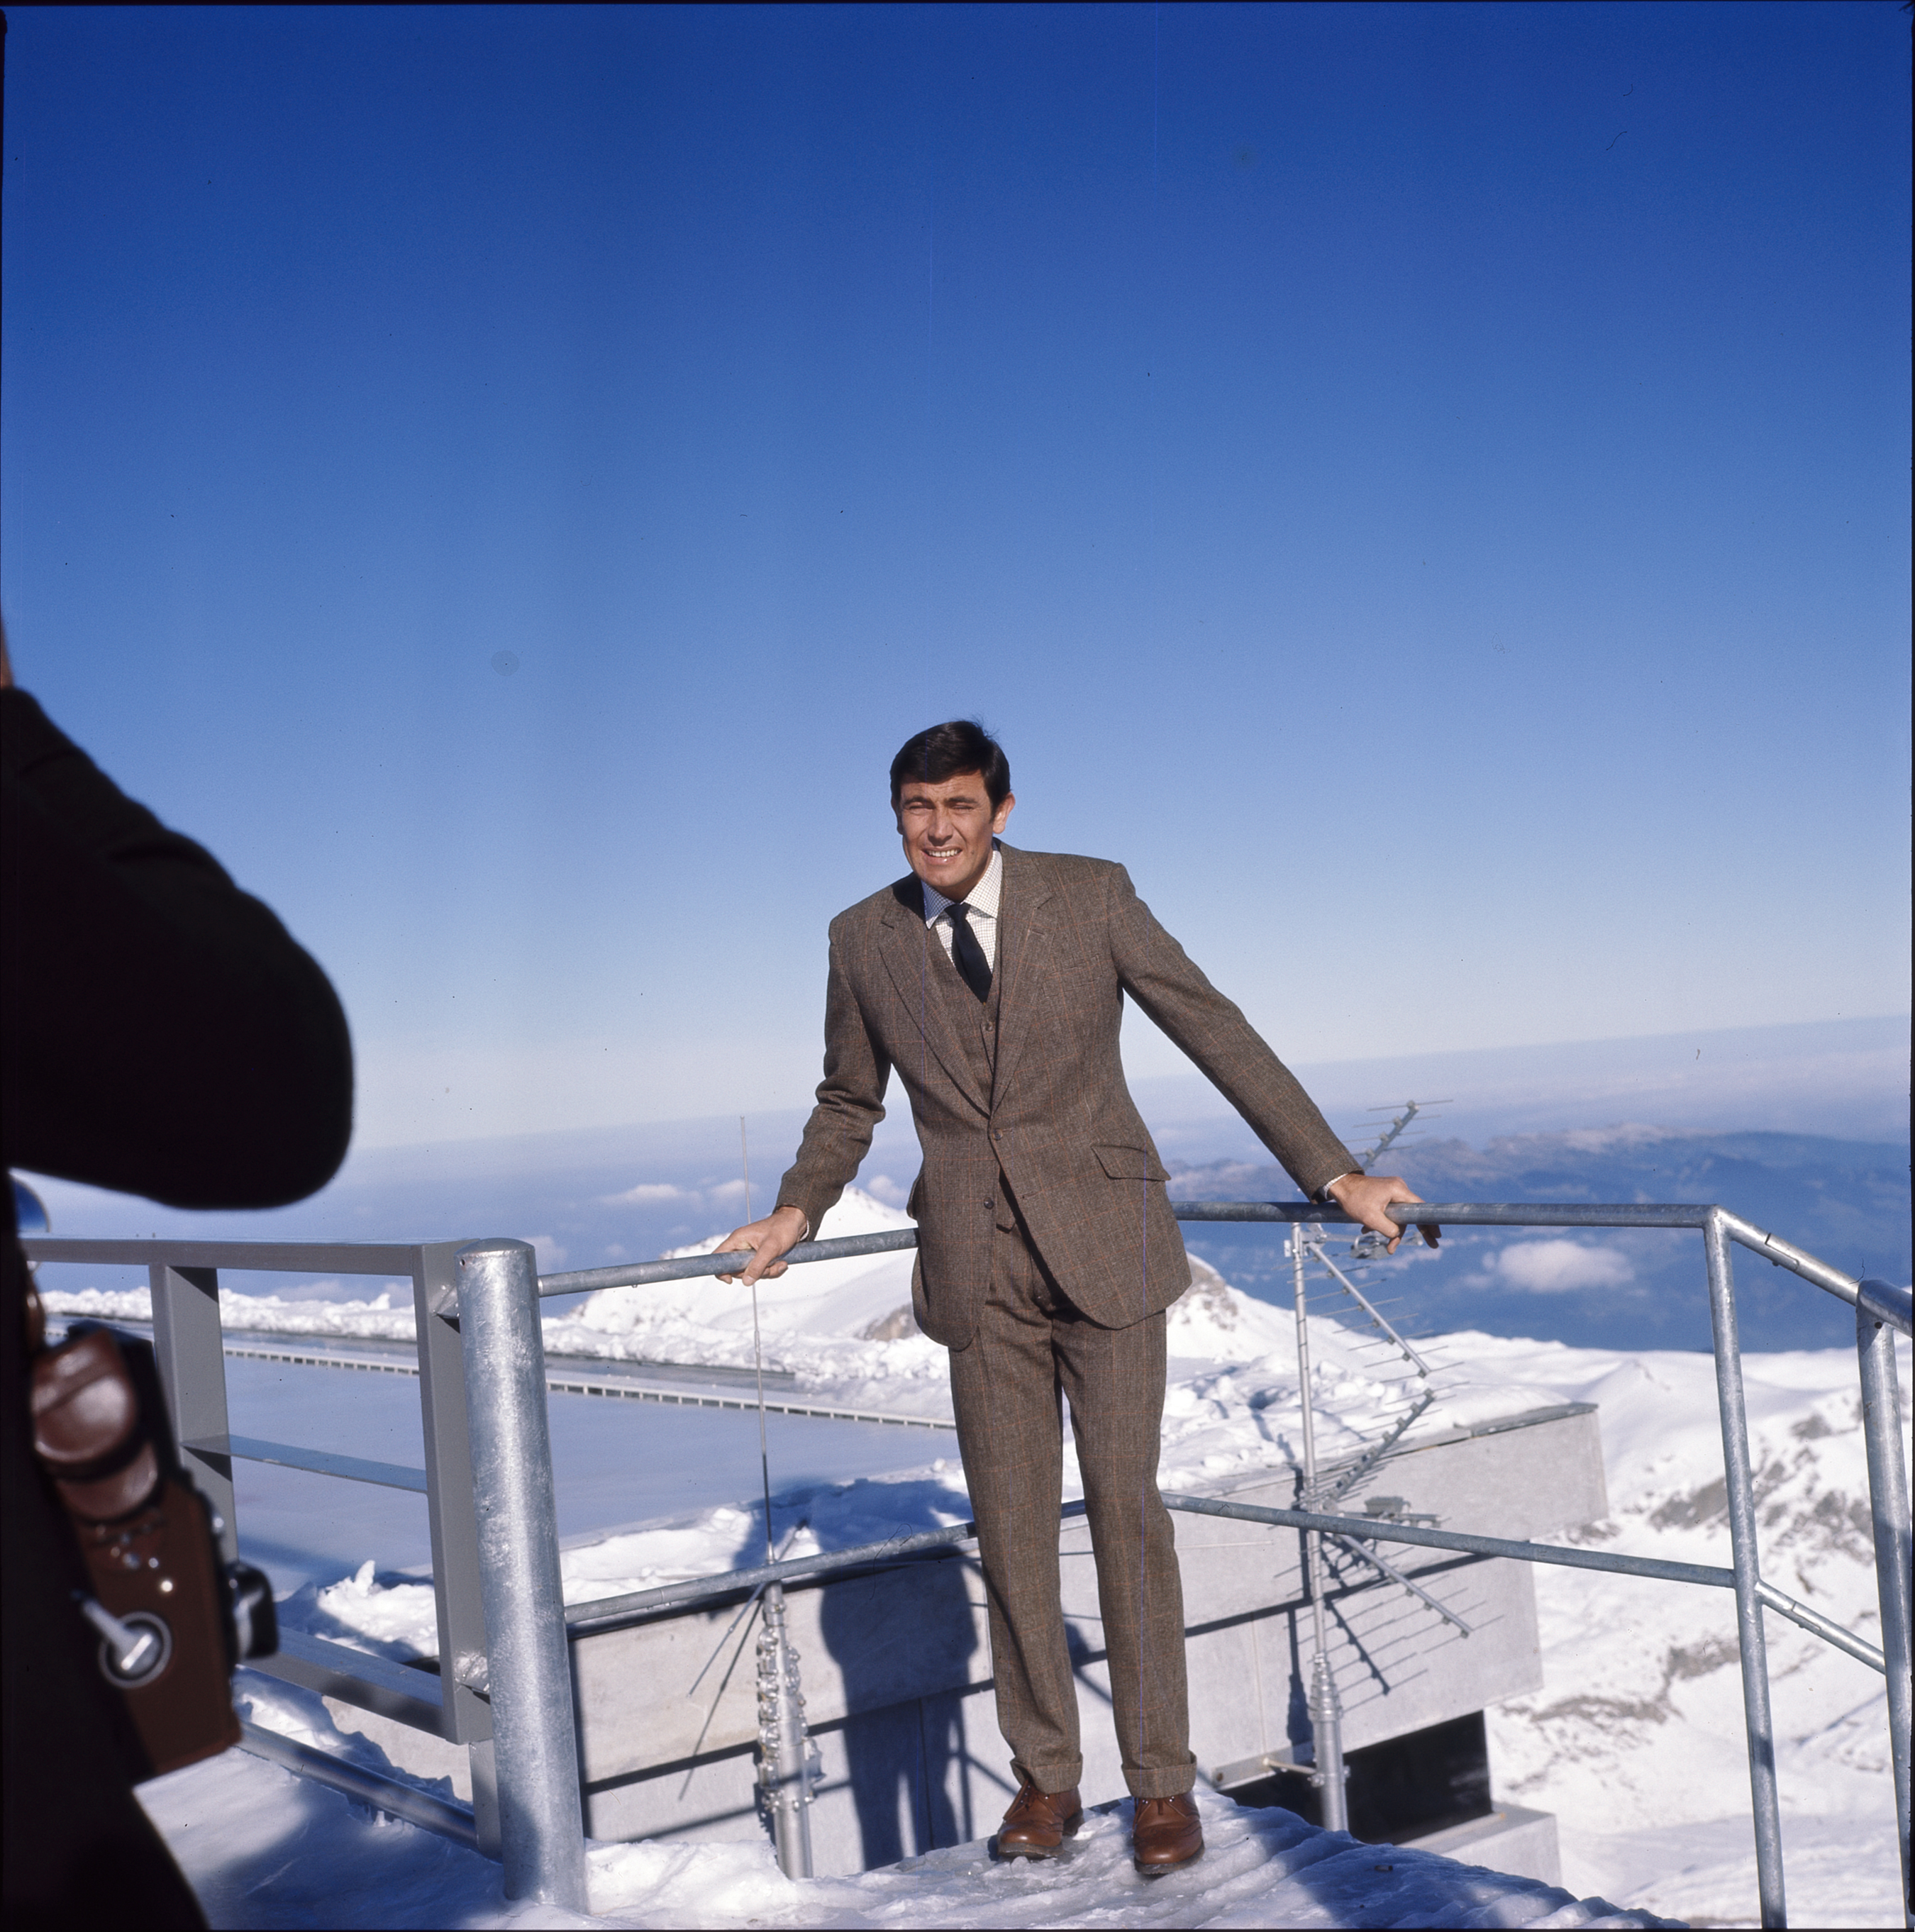 The actor as James Bond in the film "On Her Majesty's Secret Service" in 1969 | Source: Getty Images